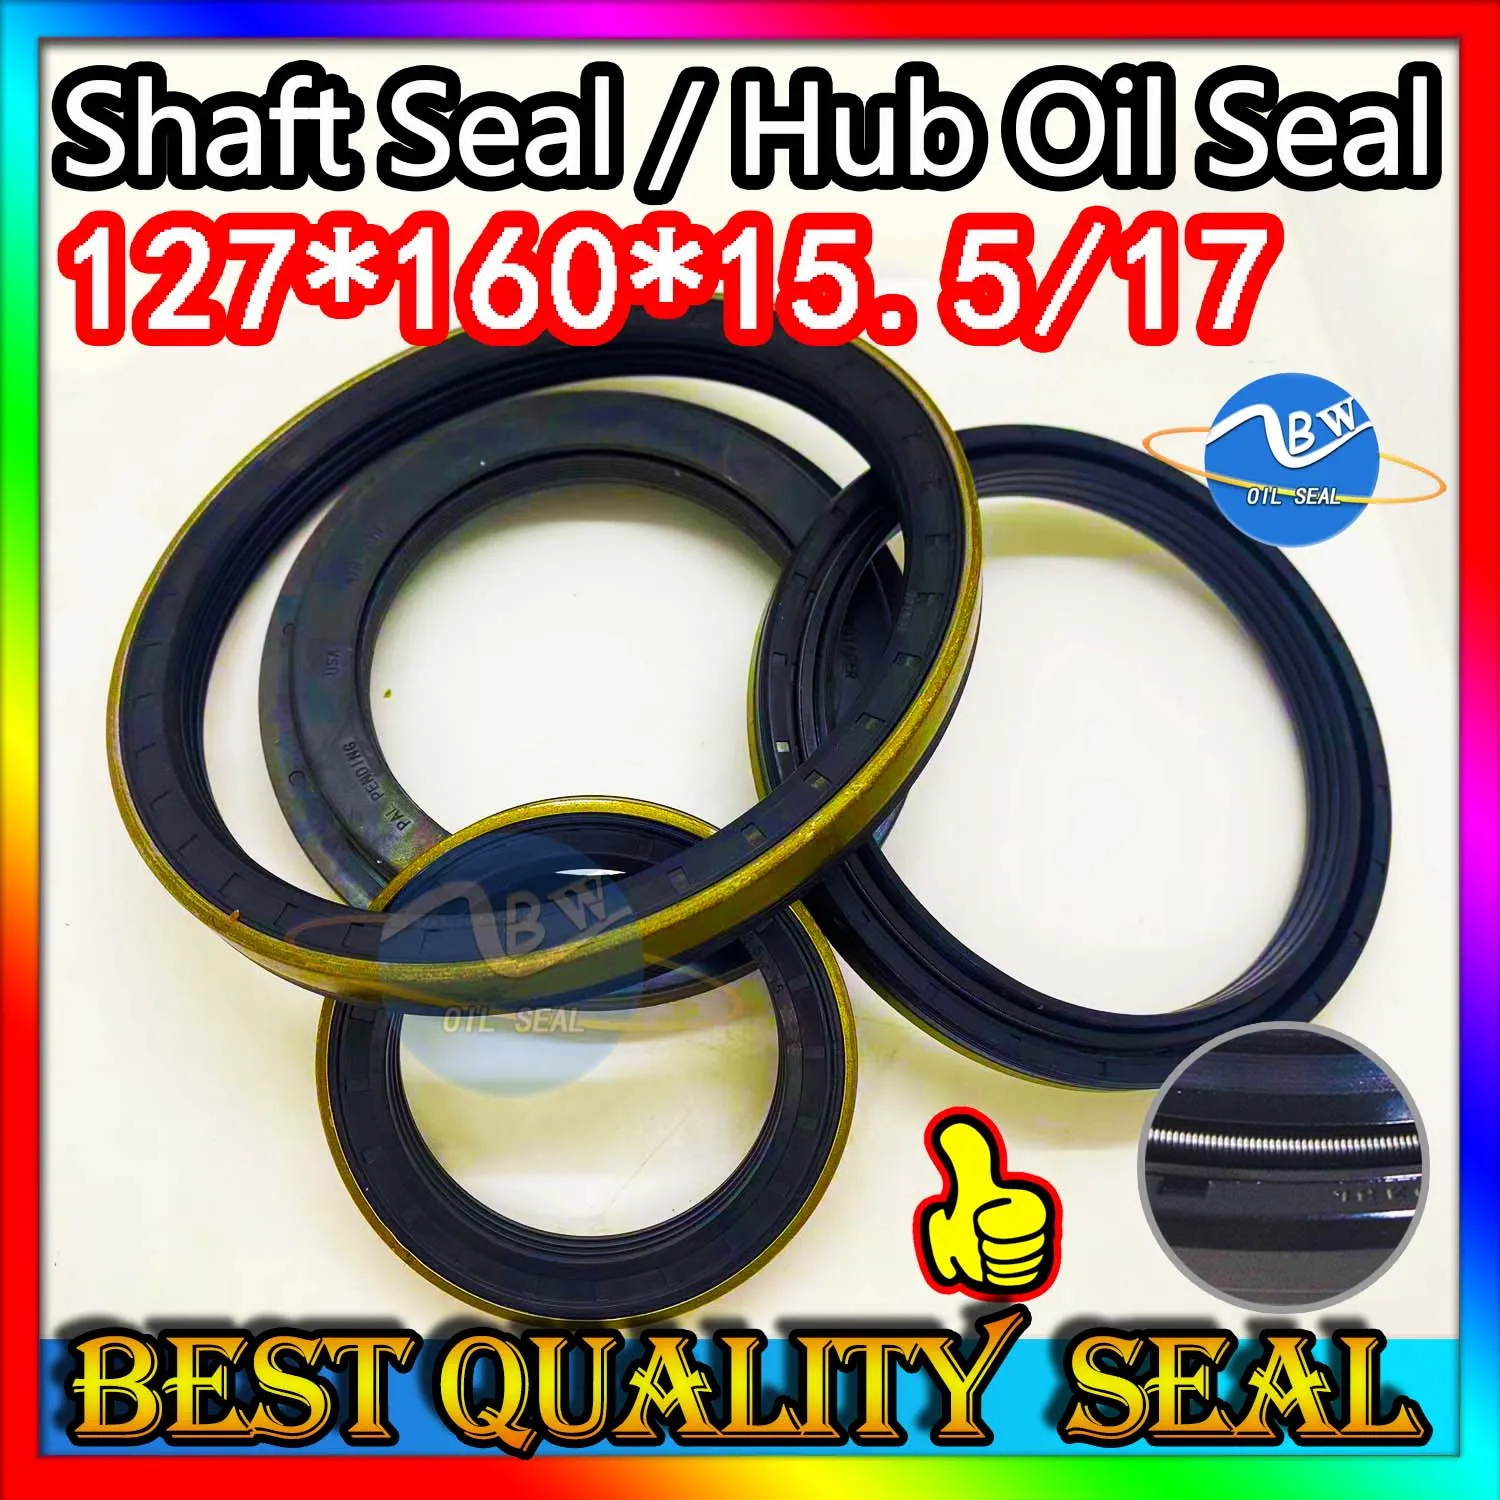 

Cassette Oil Seal 127*160*15.5/17 Hub Oil Sealing For Tractor Cat 127X160X15.5/17 Fix Best Replacement Service O-ring O ring